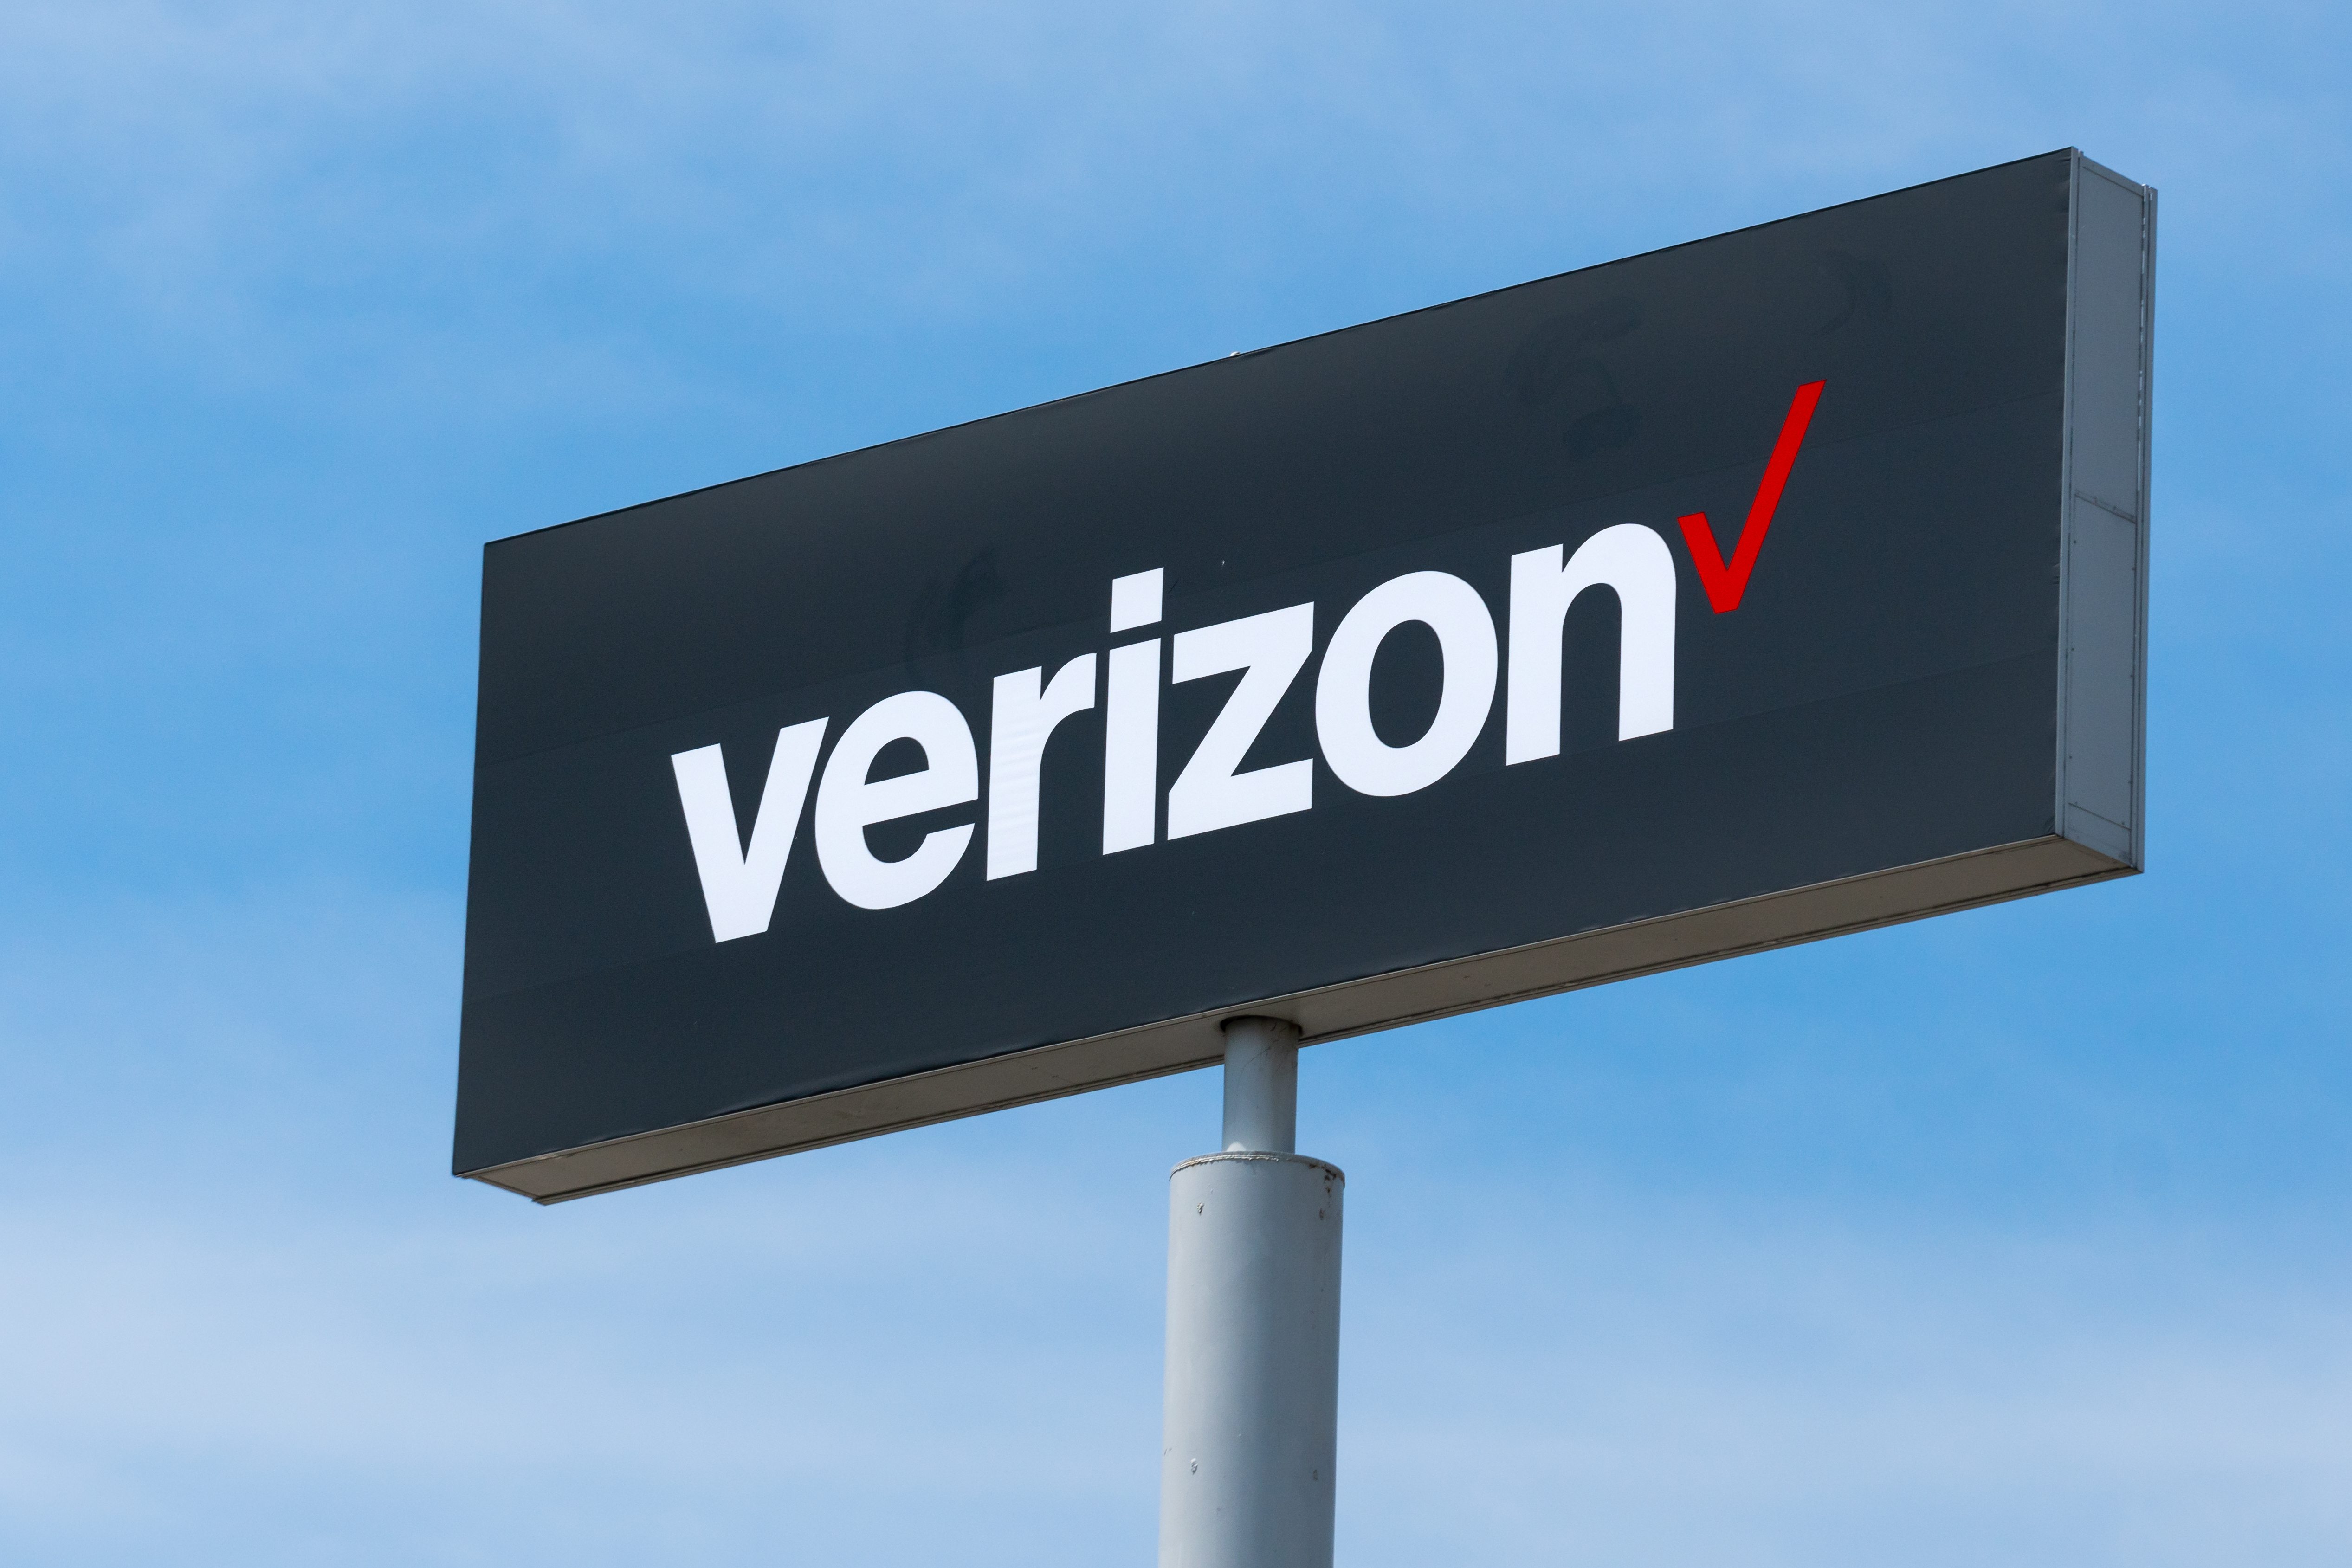 Verizon Expands LTE Home Internet to Rural Areas